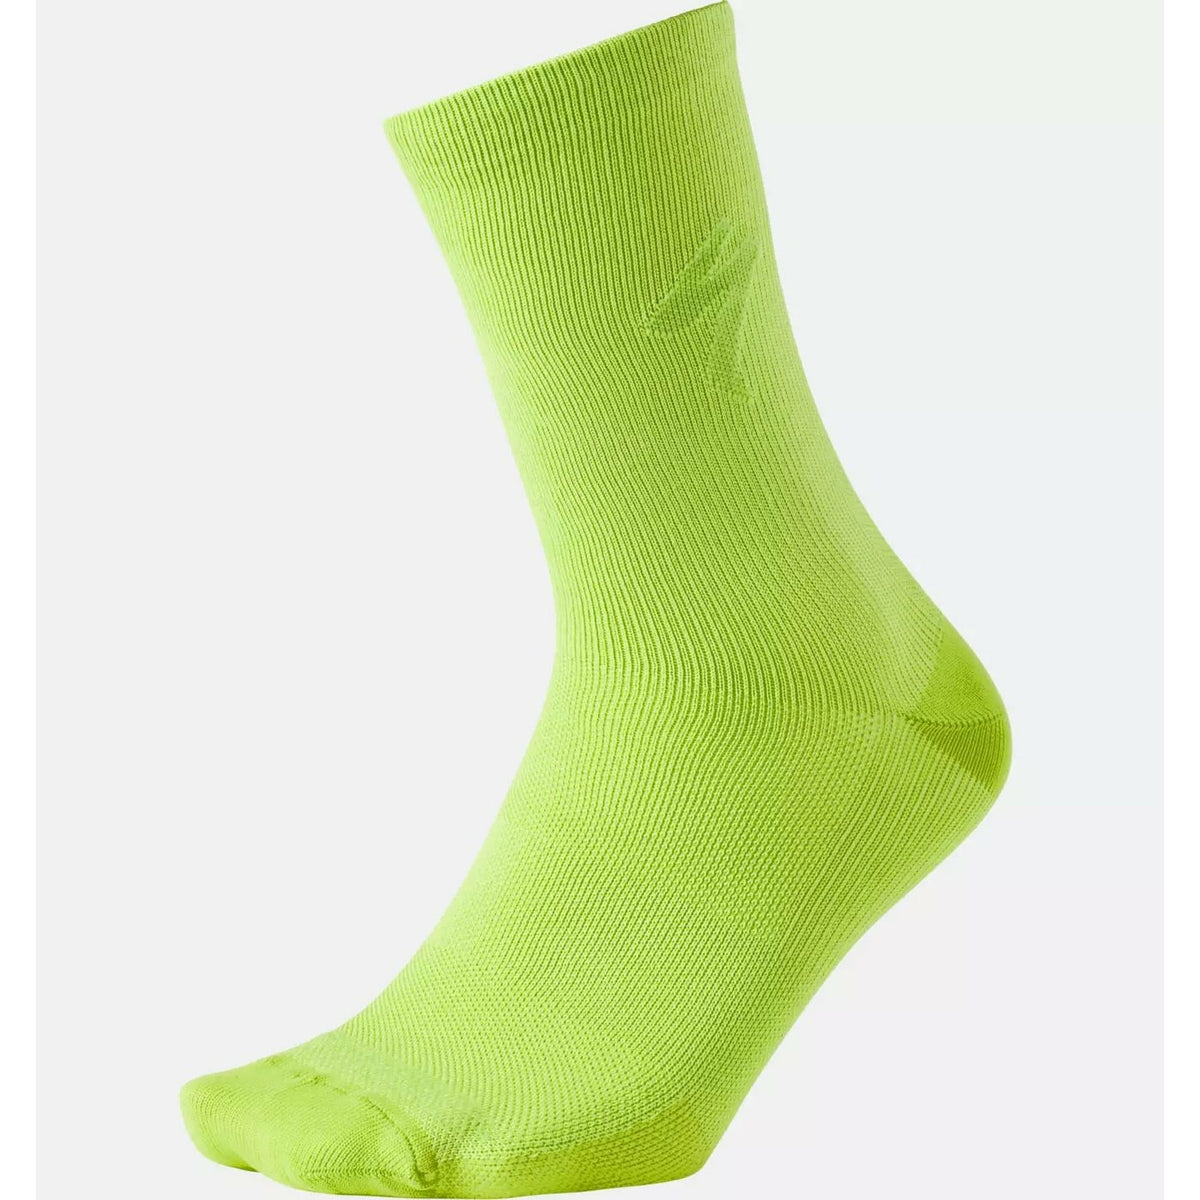 Specialized HyprViz Soft Air Reflective Tall Cycling Sock